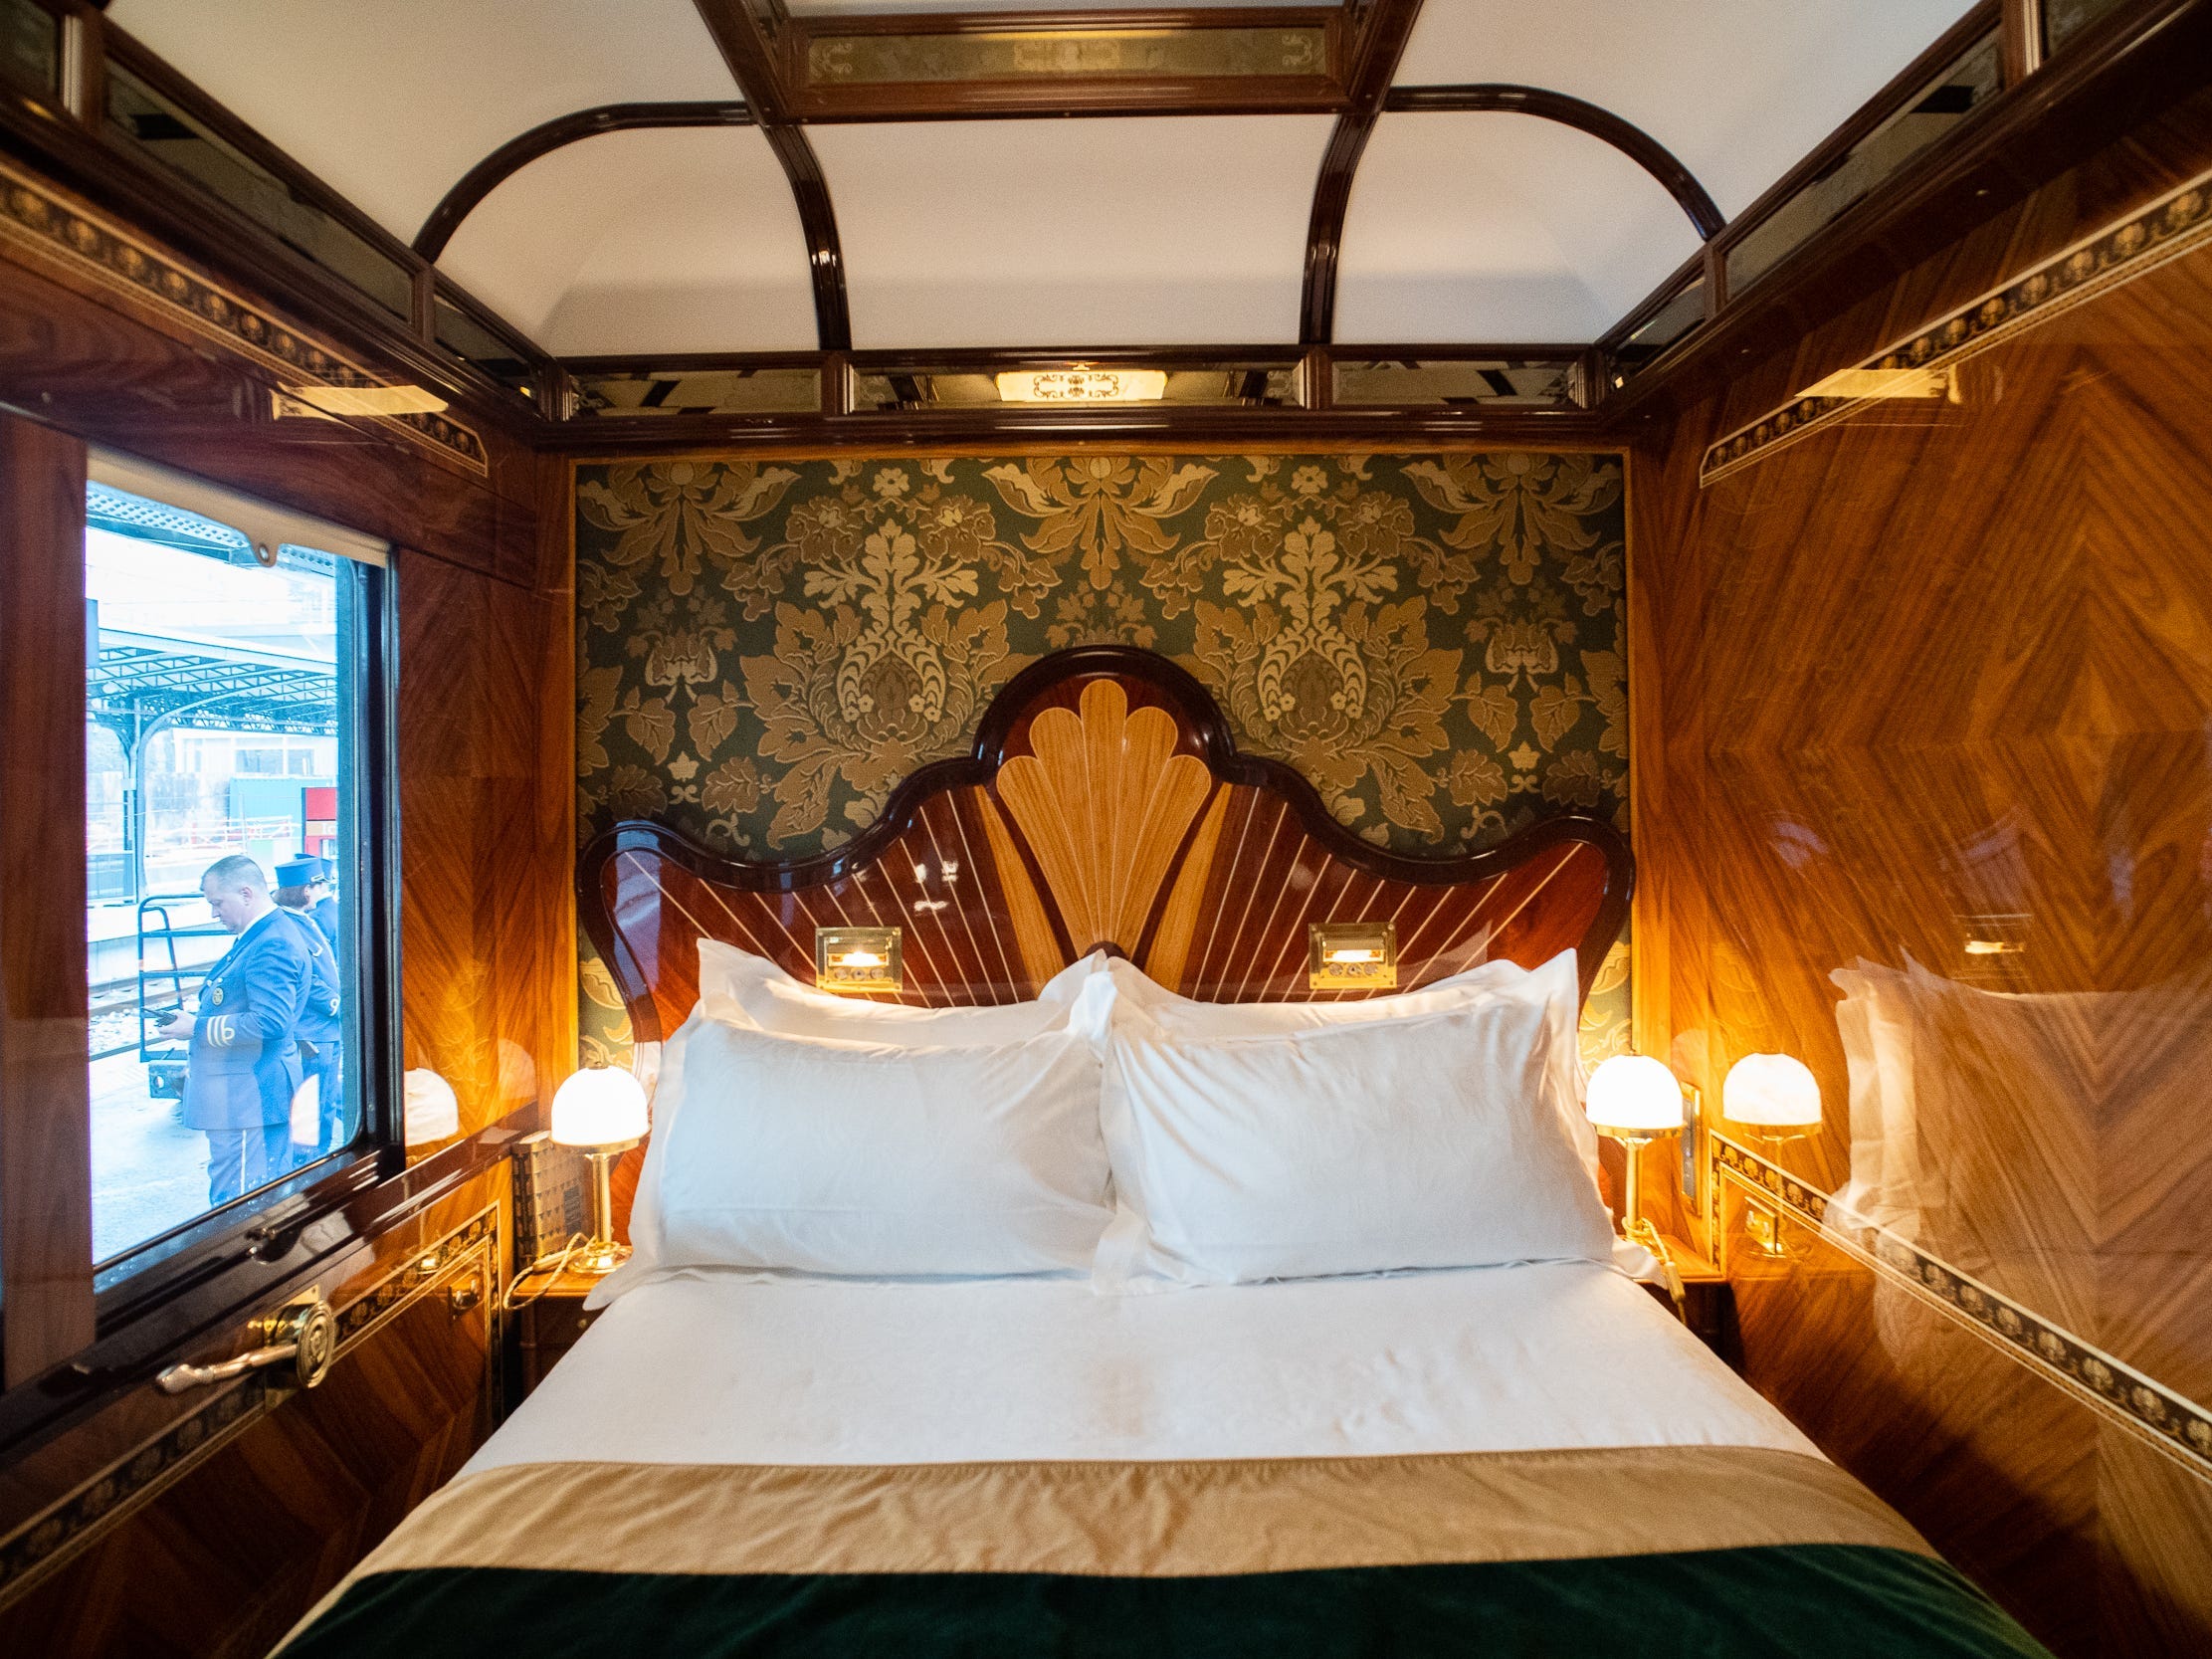 A luxurious train cabin with wooden walls and a fancy double bed with a decorative headboard